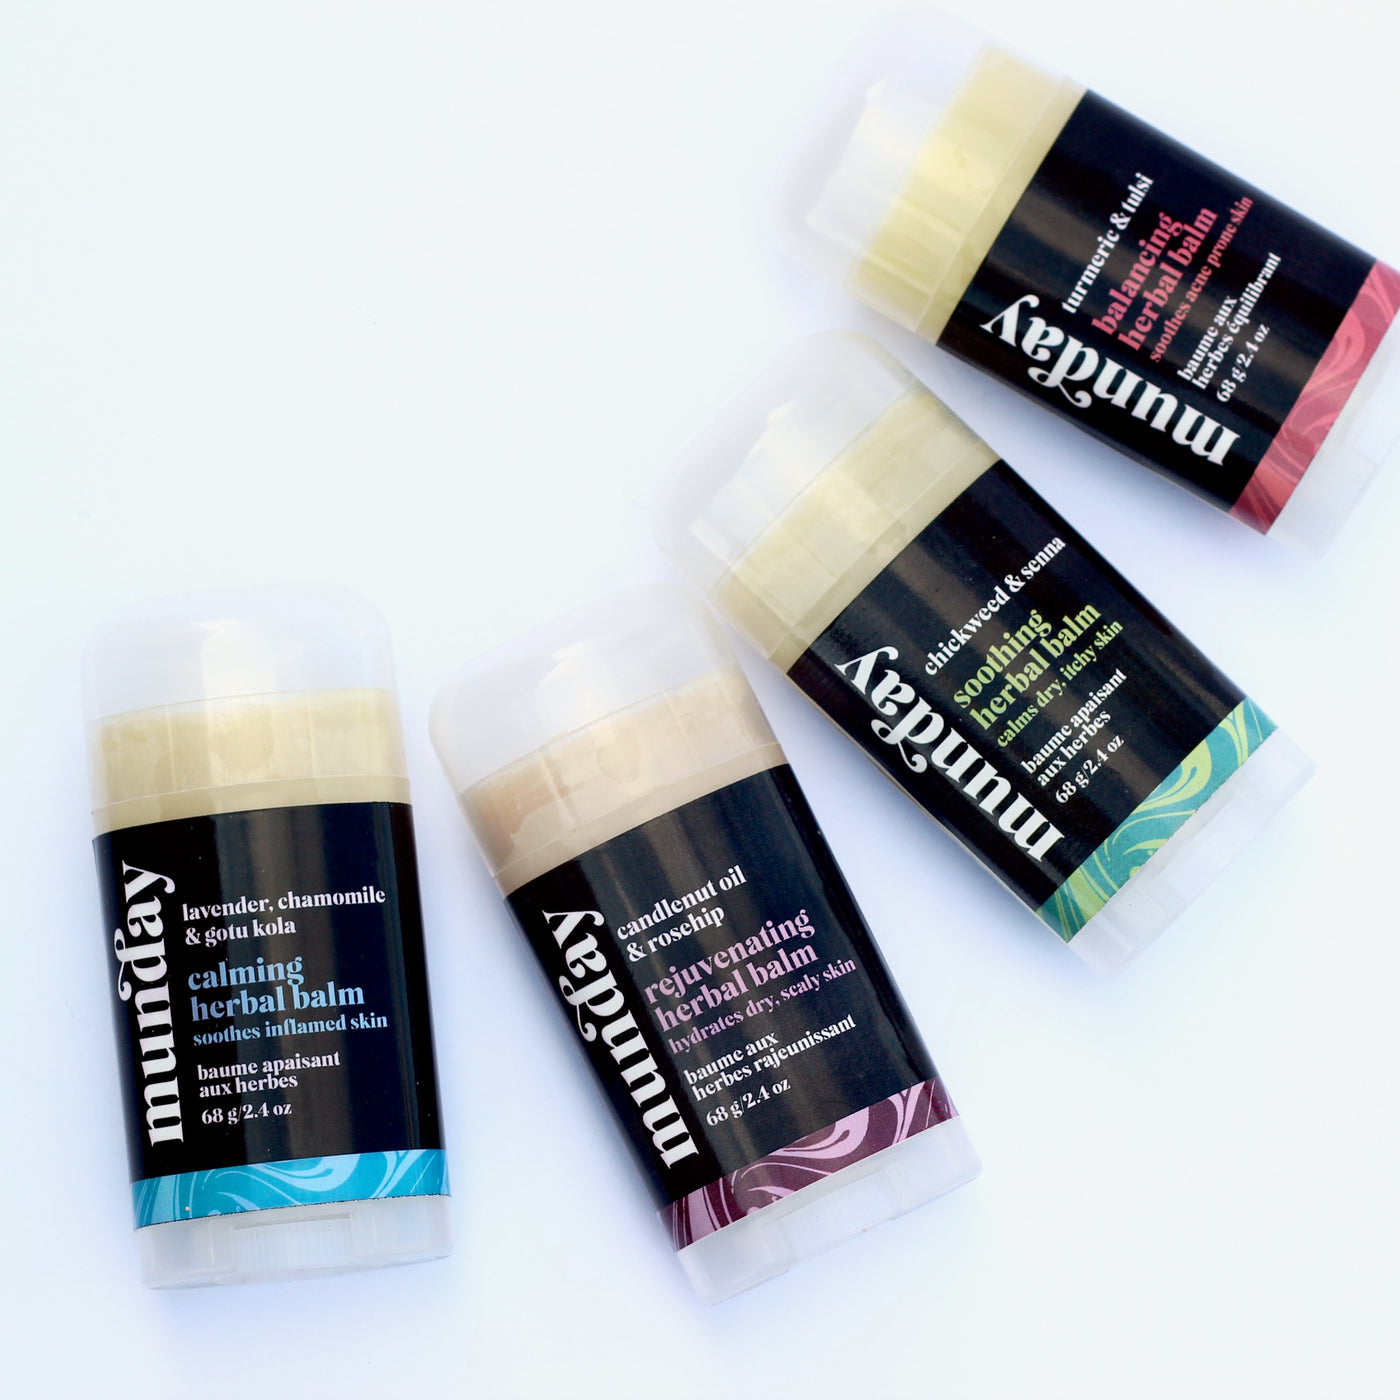 Herbal Balms infused with nourishing oils and plant extracts in a twist-up stick for easy application to dry areas